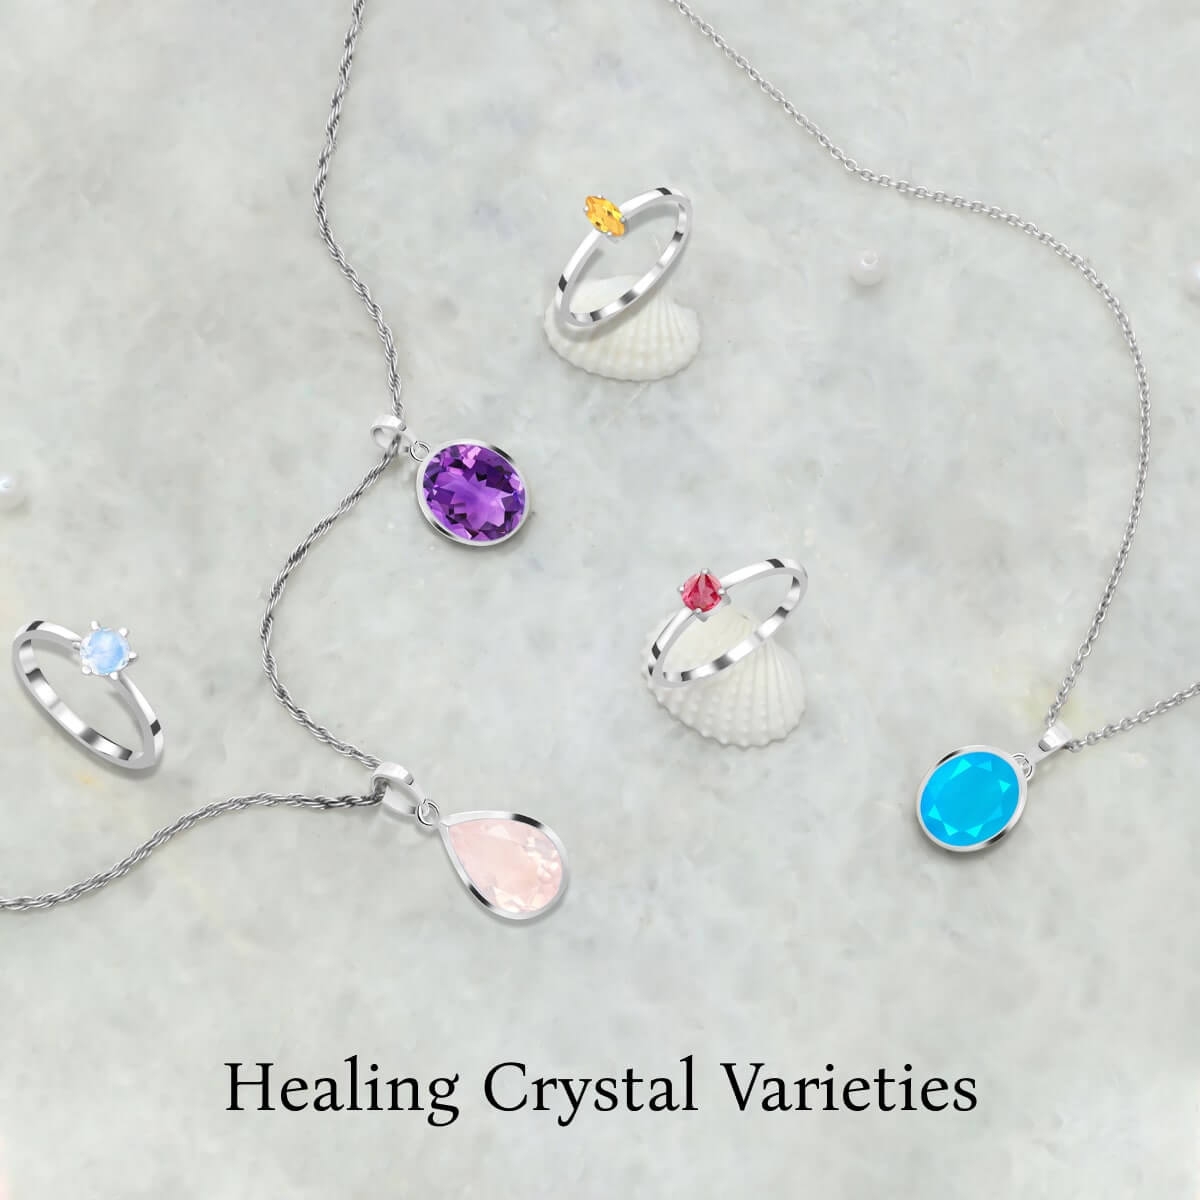 Different types of healing crystals and their meaning